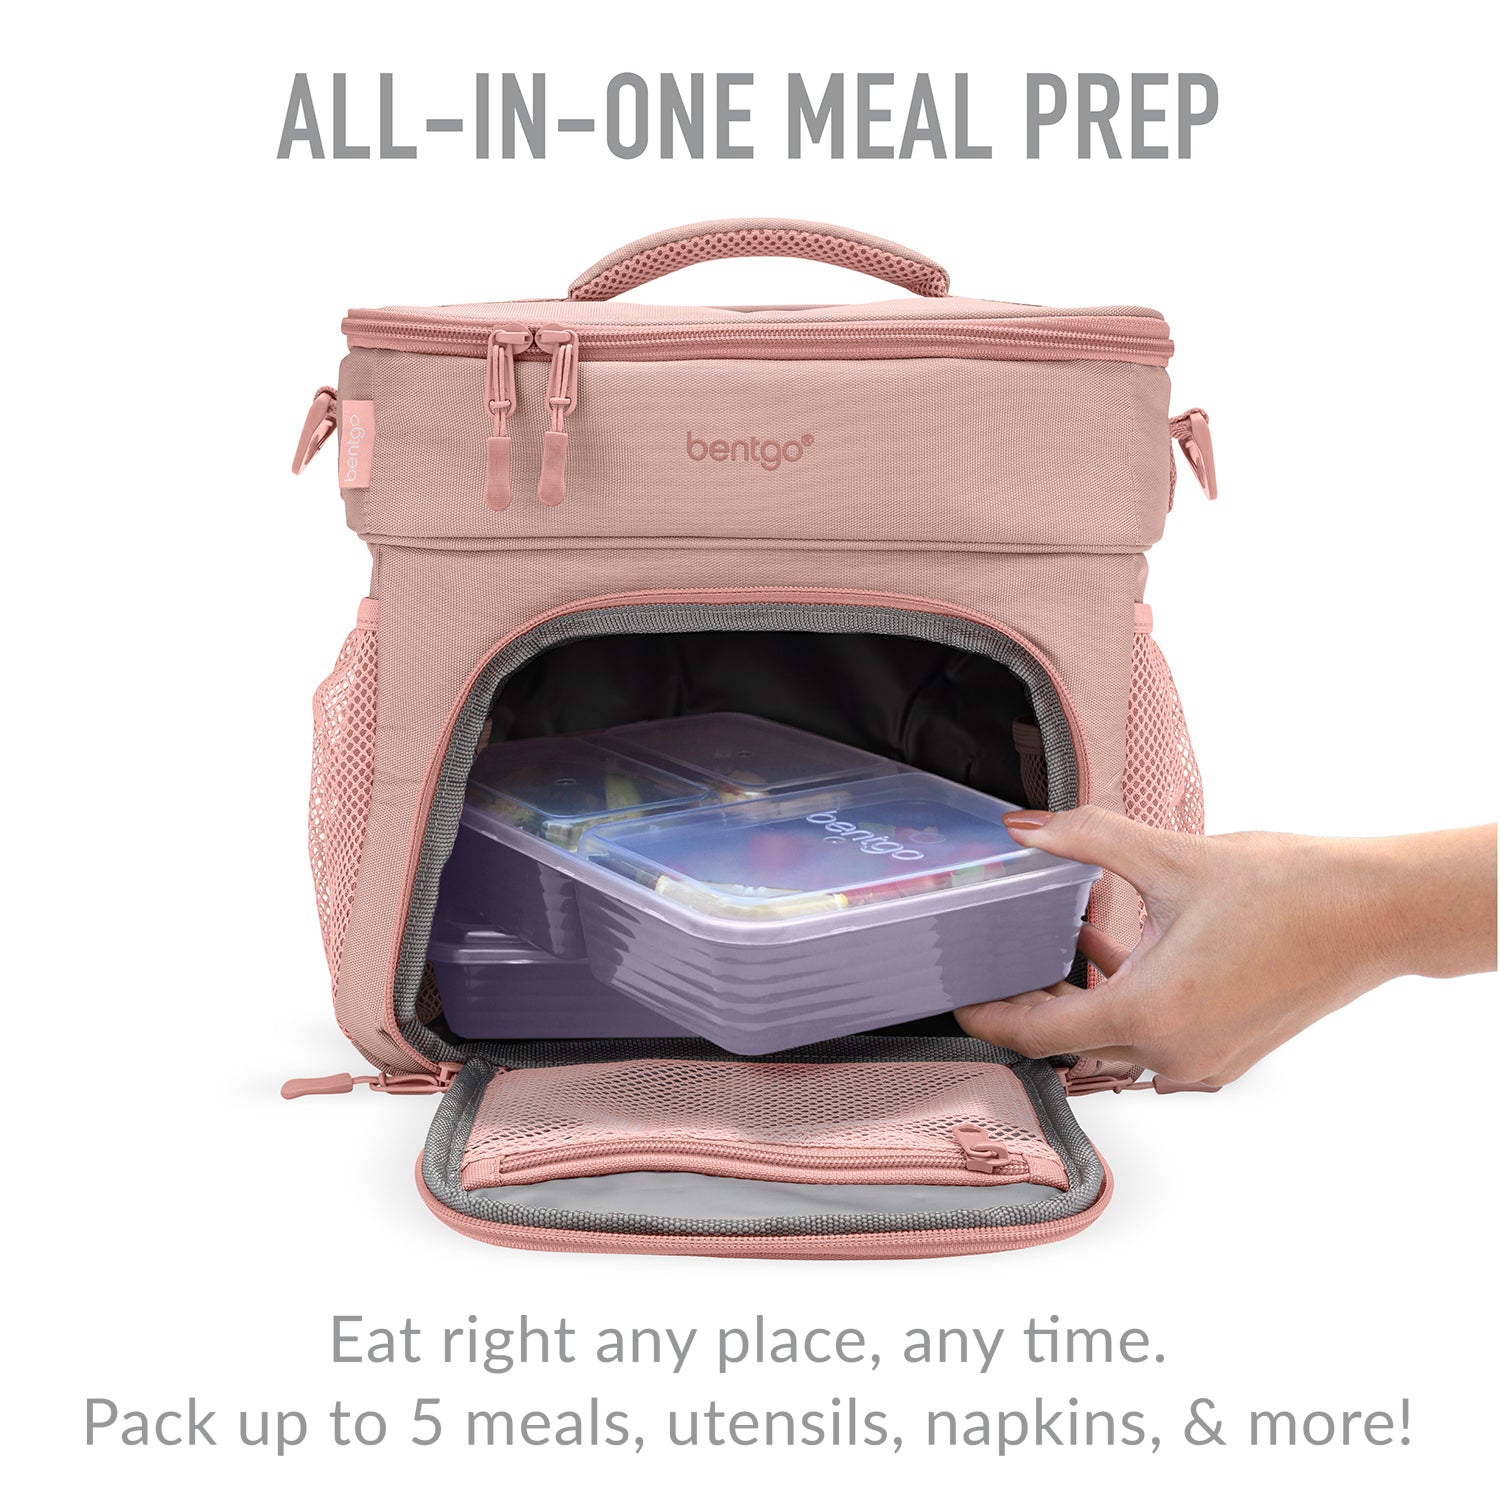 10 Best Meal Prep Bags 2019 | UPDATED RANKING ▻▻  https://wiki.ezvid.com/best-meal-prep-bags Disclaimer: These choices may be  out of date. You need to go to wiki.ezvid.com to see the... | By Ezvid  WikiFacebook